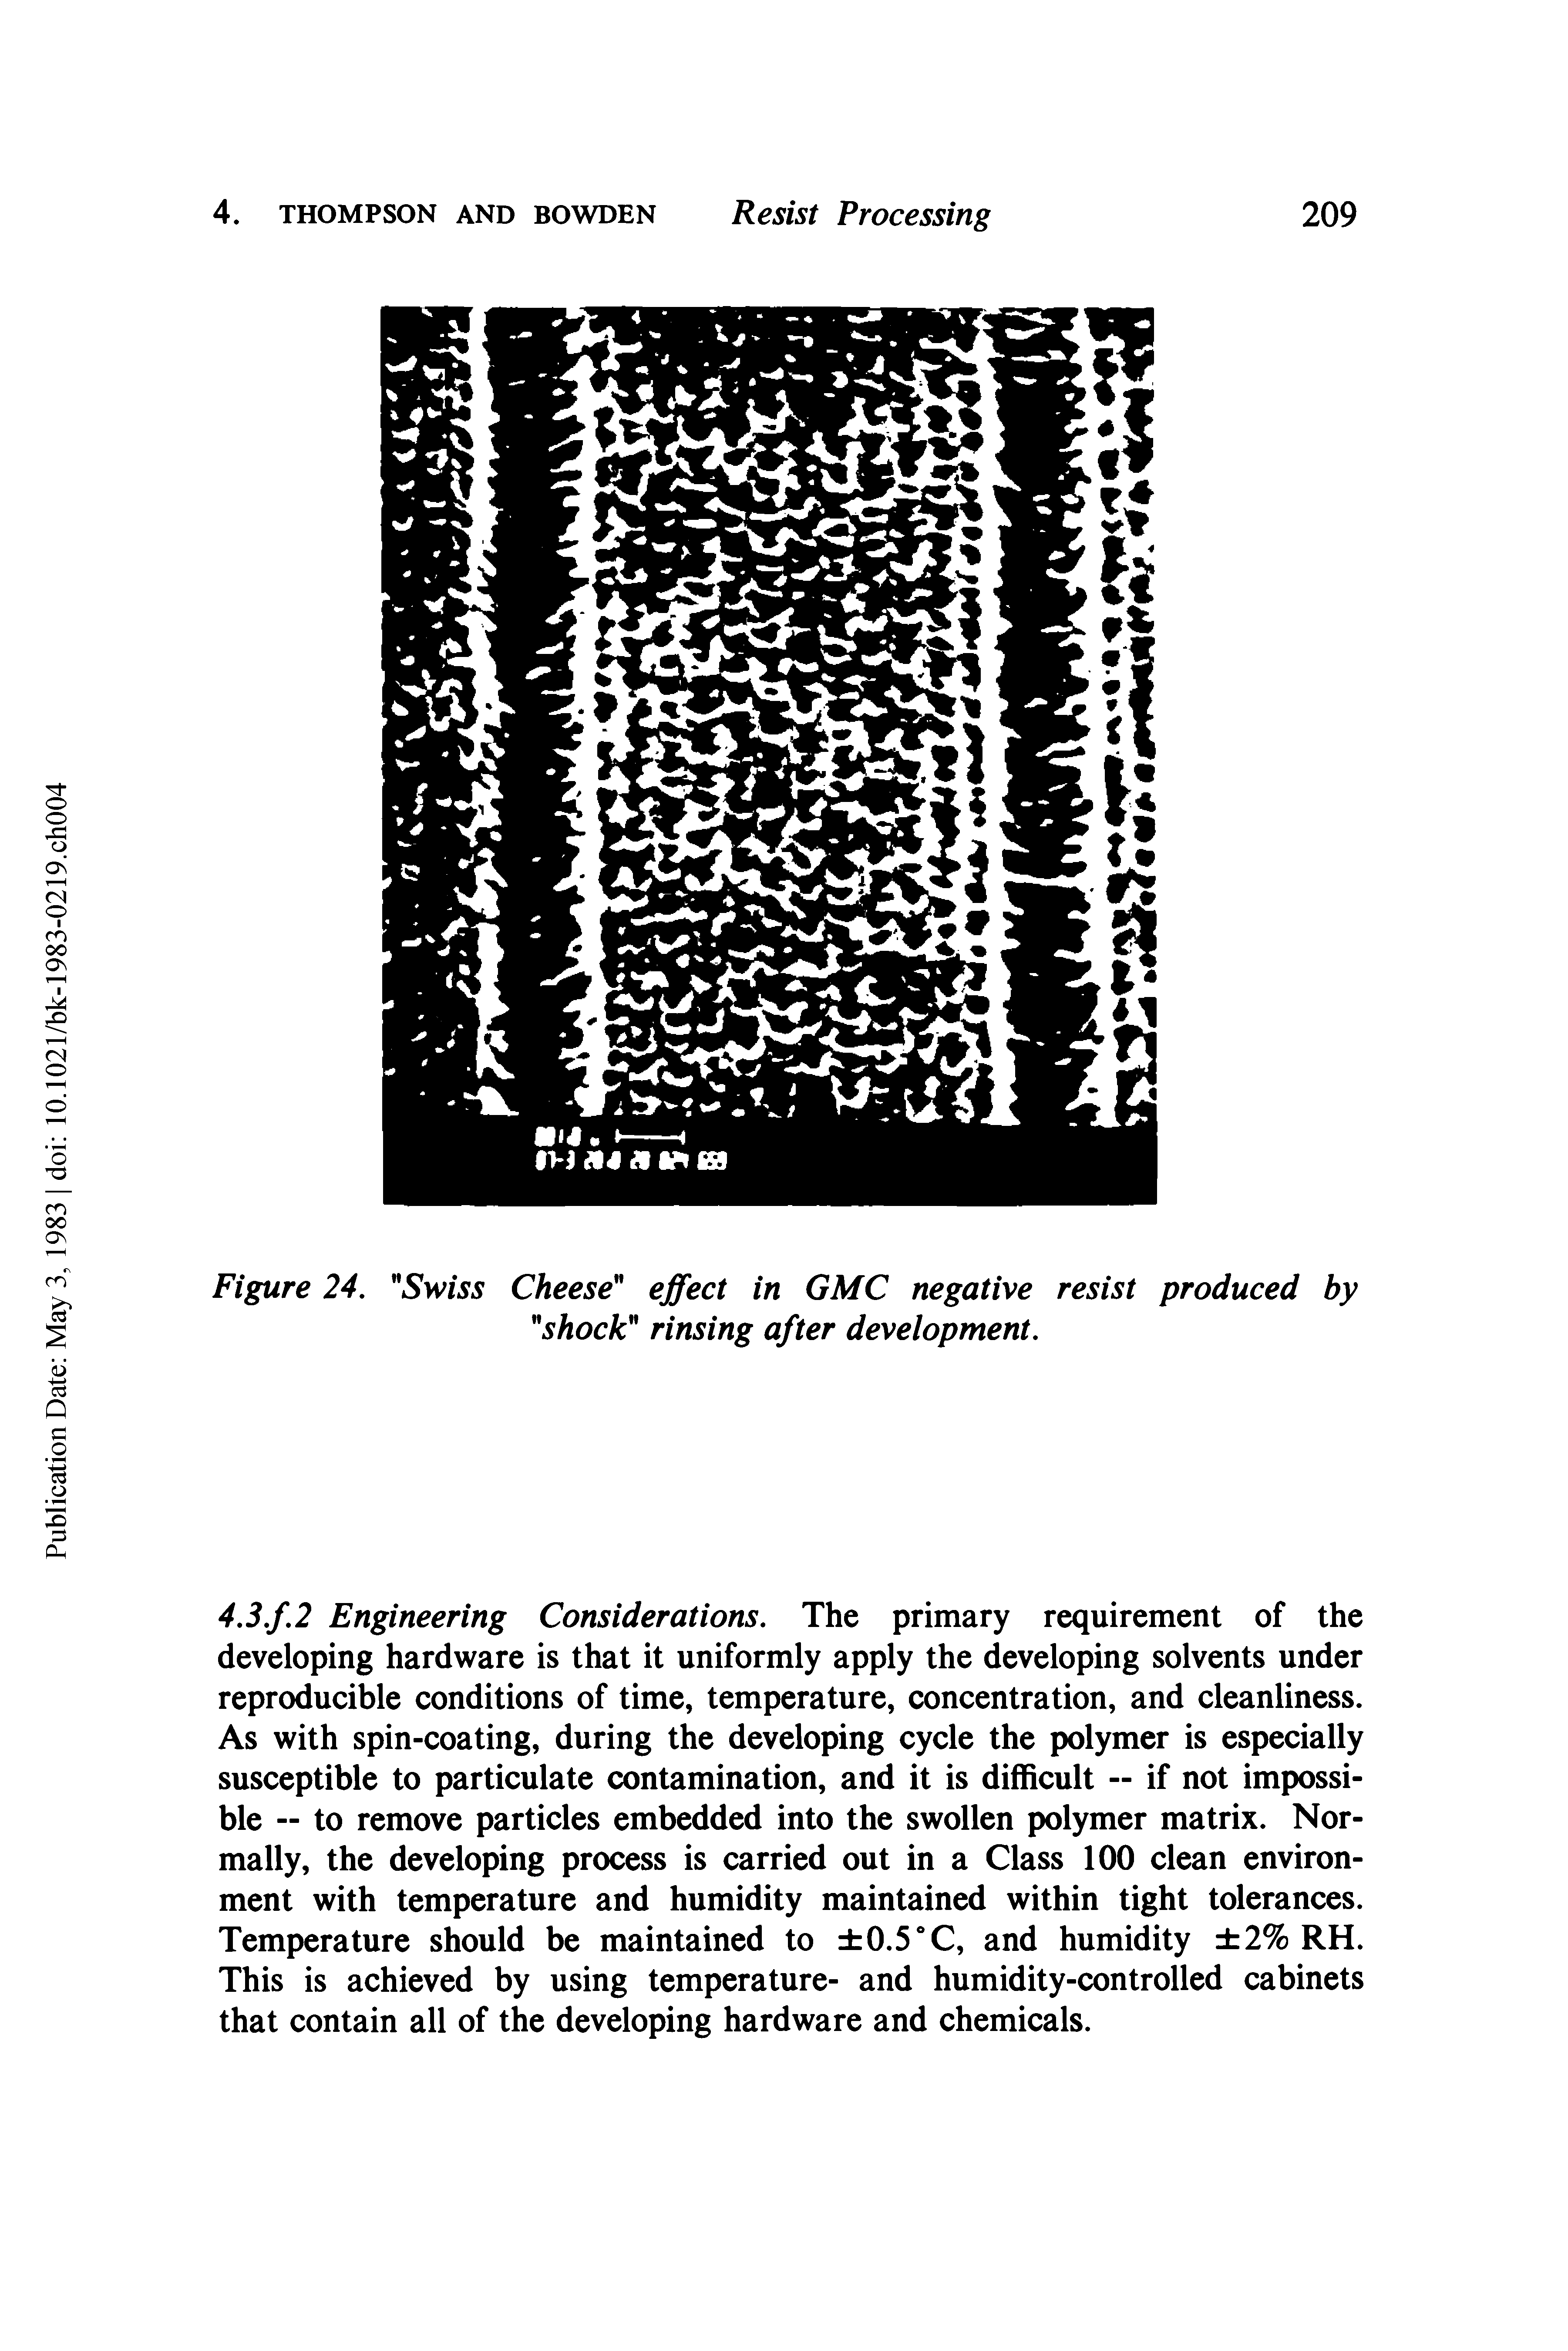 Figure 24. Swiss Cheese effect in GMC negative resist produced by shock rinsing after development.